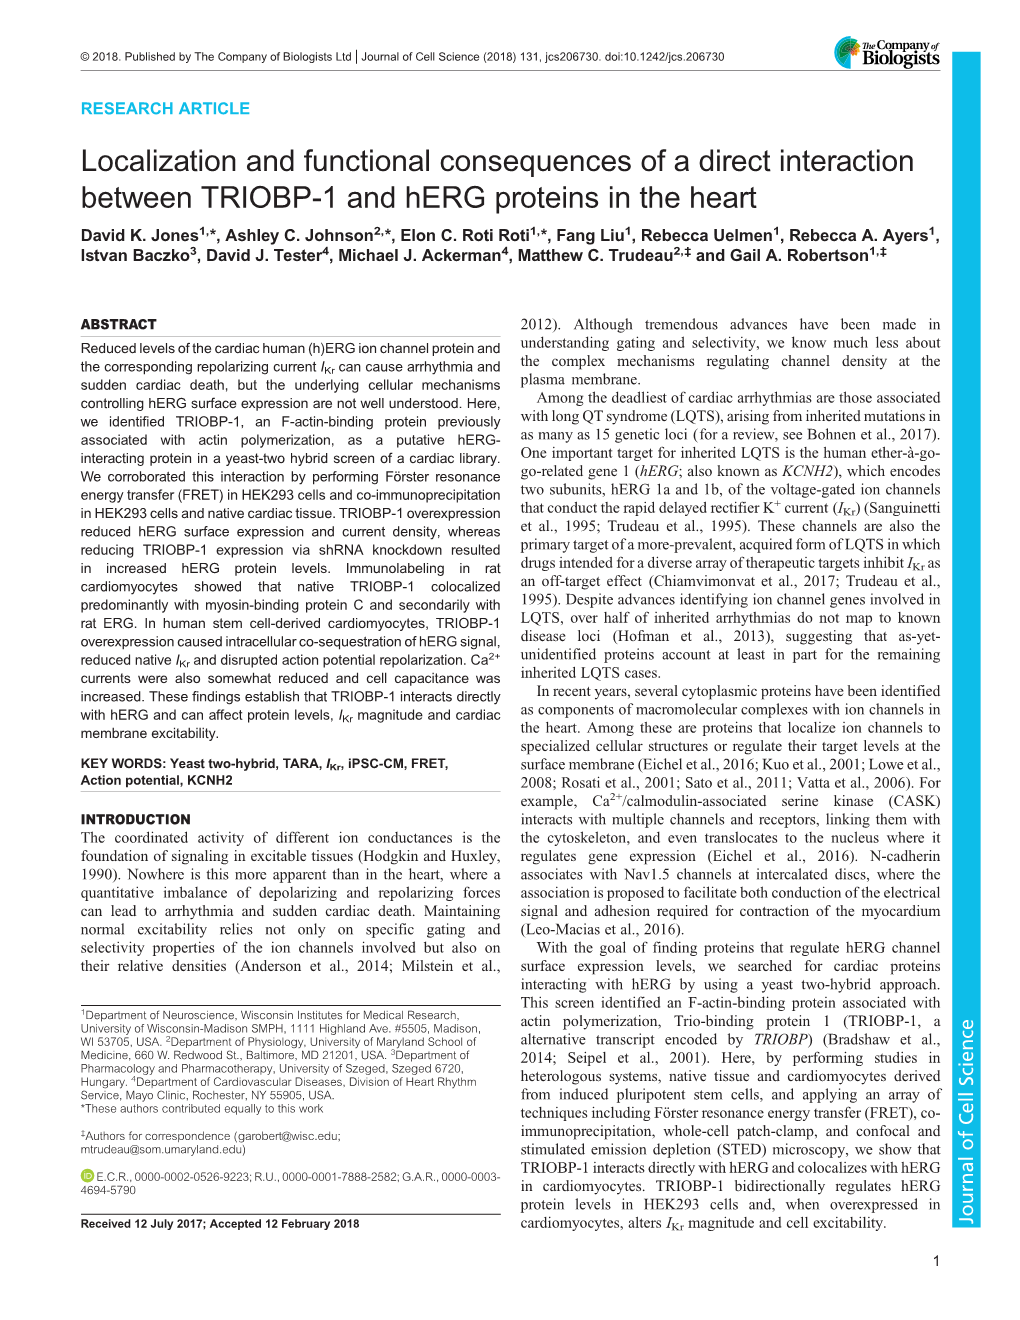 Localization and Functional Consequences of a Direct Interaction Between TRIOBP-1 and Herg Proteins in the Heart David K